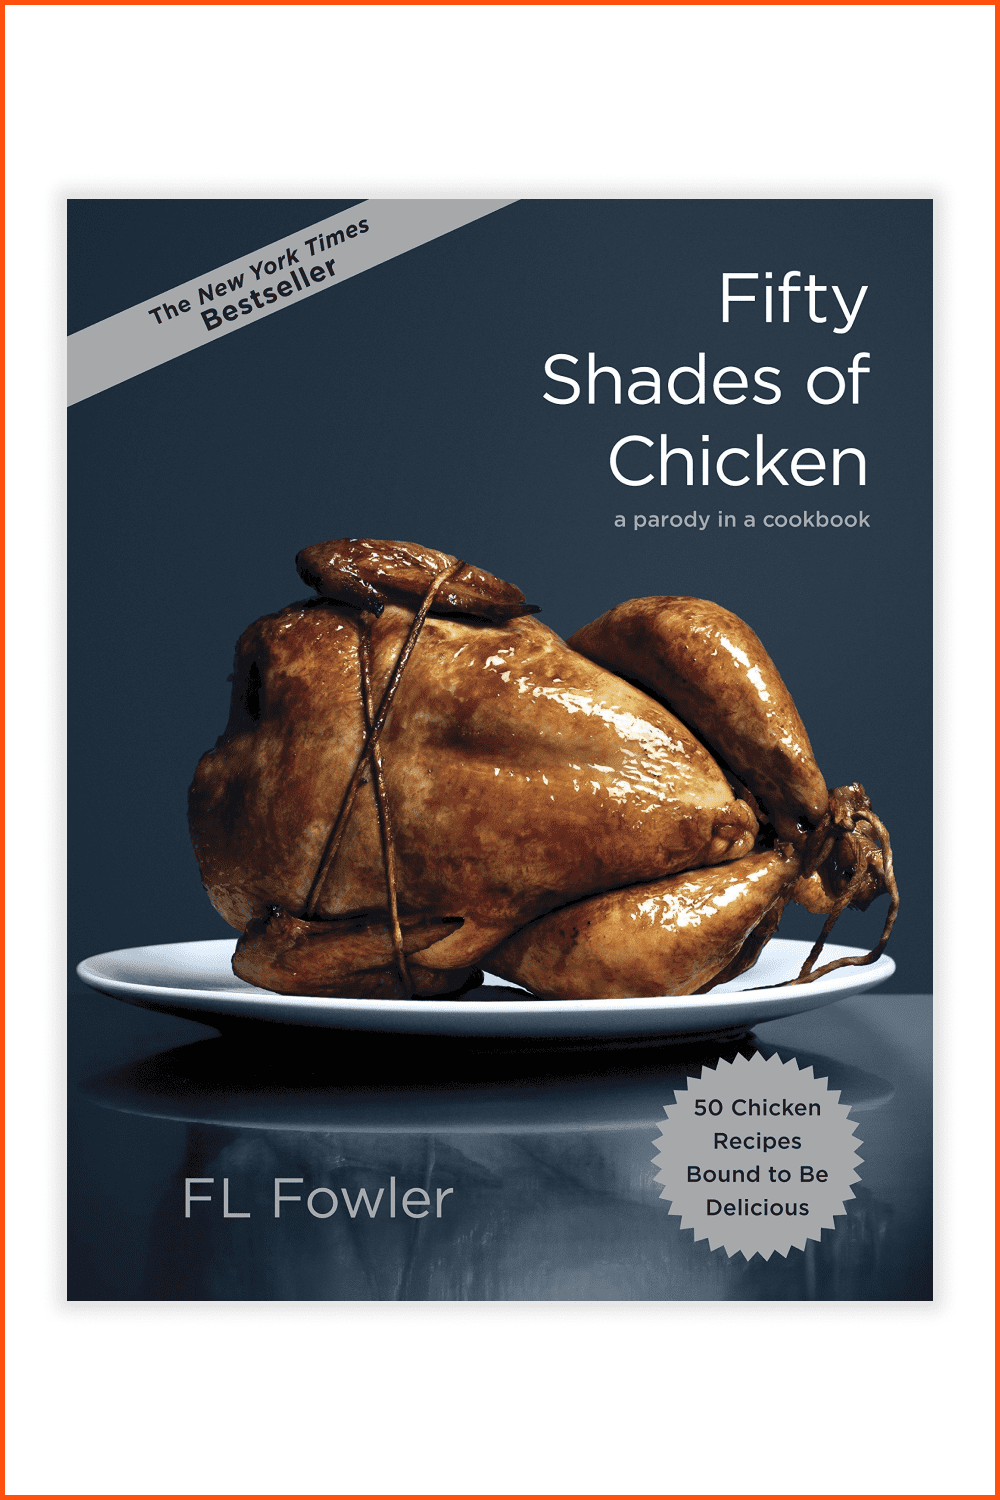 Fifty Shades of Chicken: A Parody in a Cookbook.